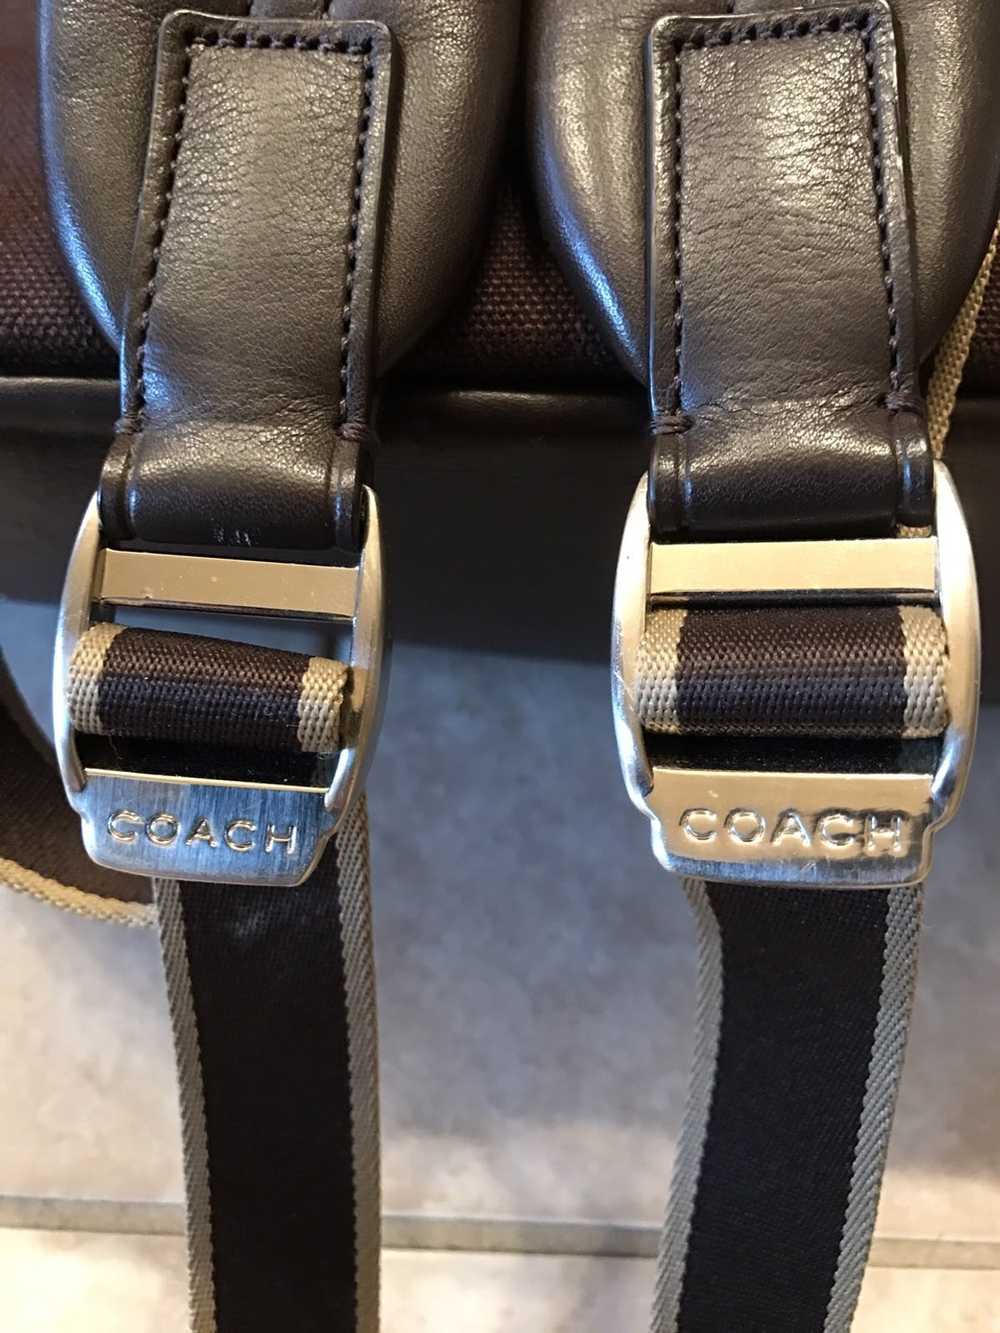 Coach Leather Backpack - image 3